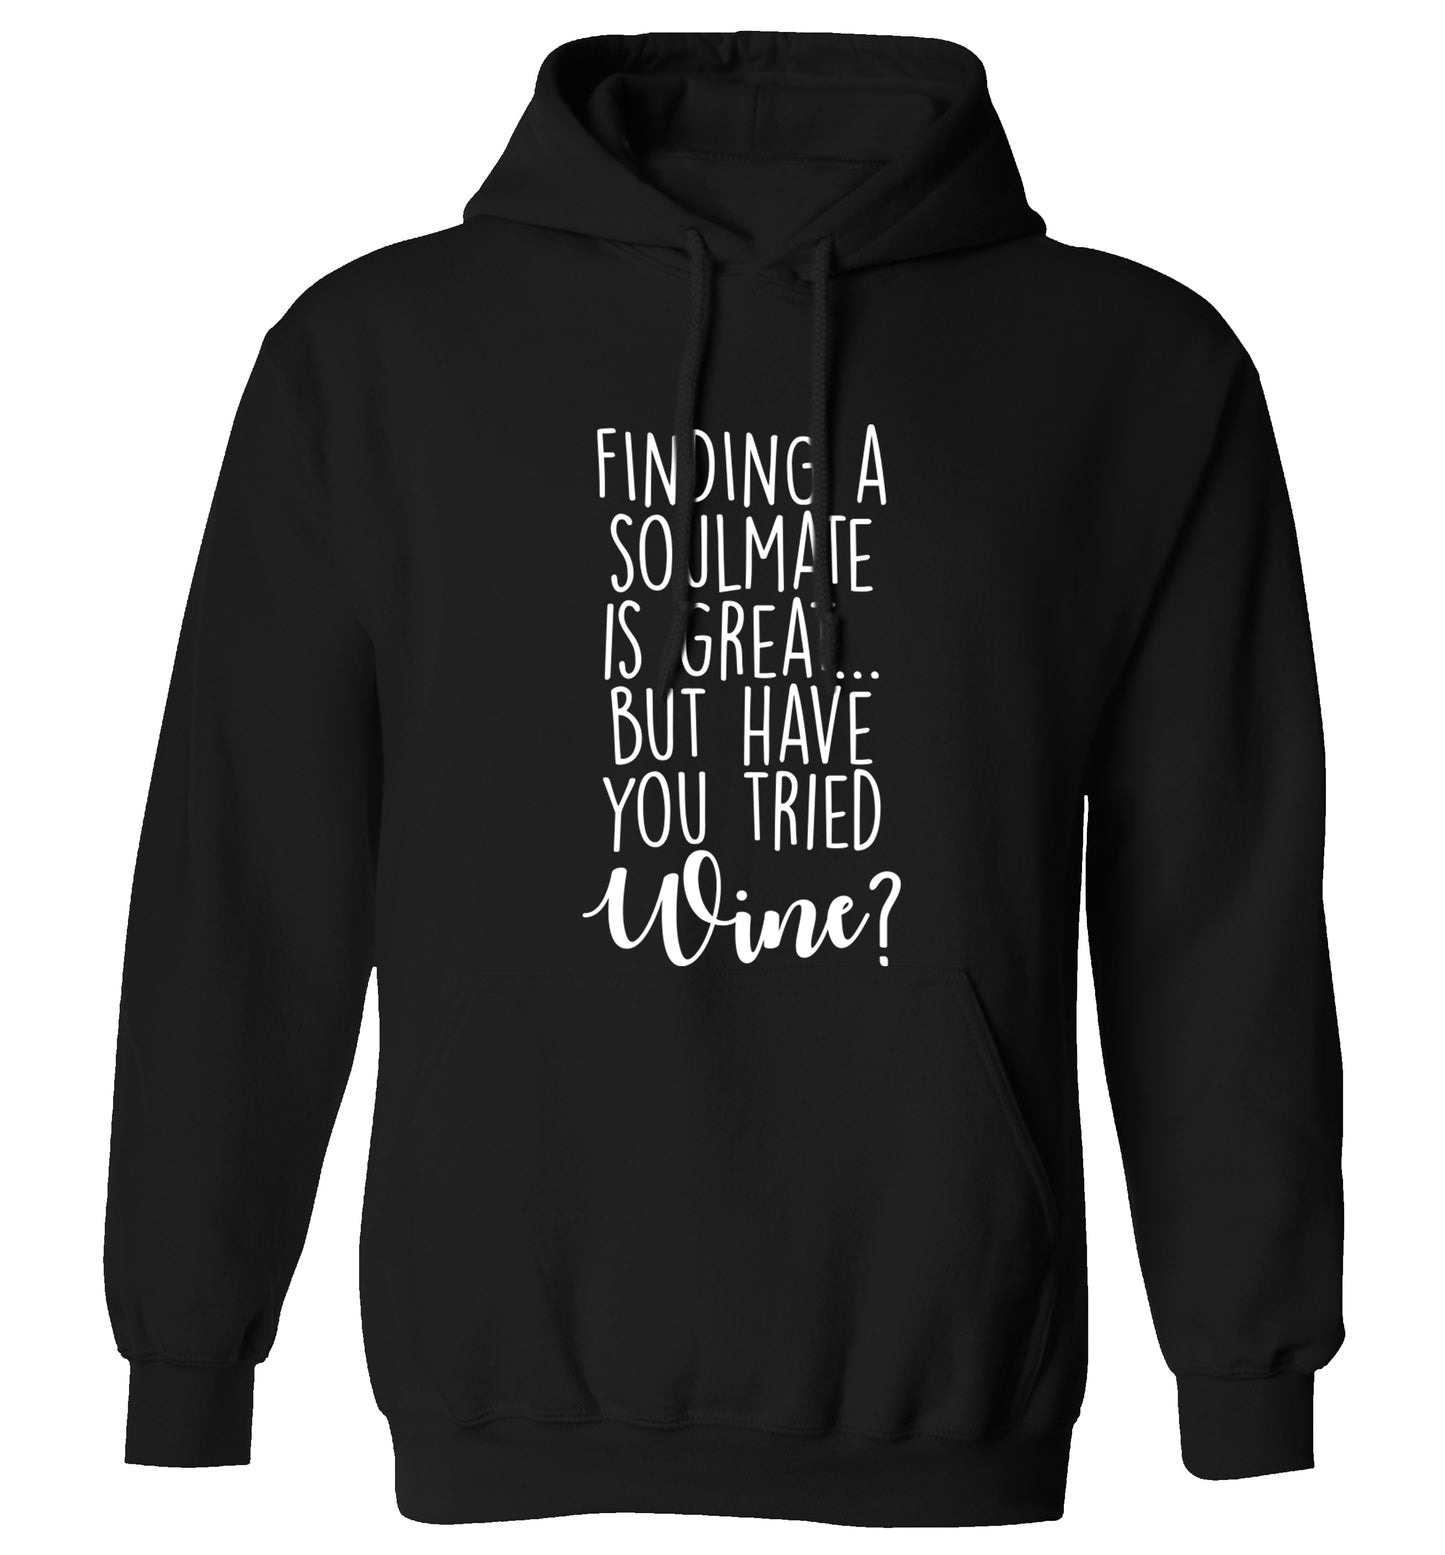 Finding a soulmate is great but have you tried wine? adults unisex black hoodie 2XL